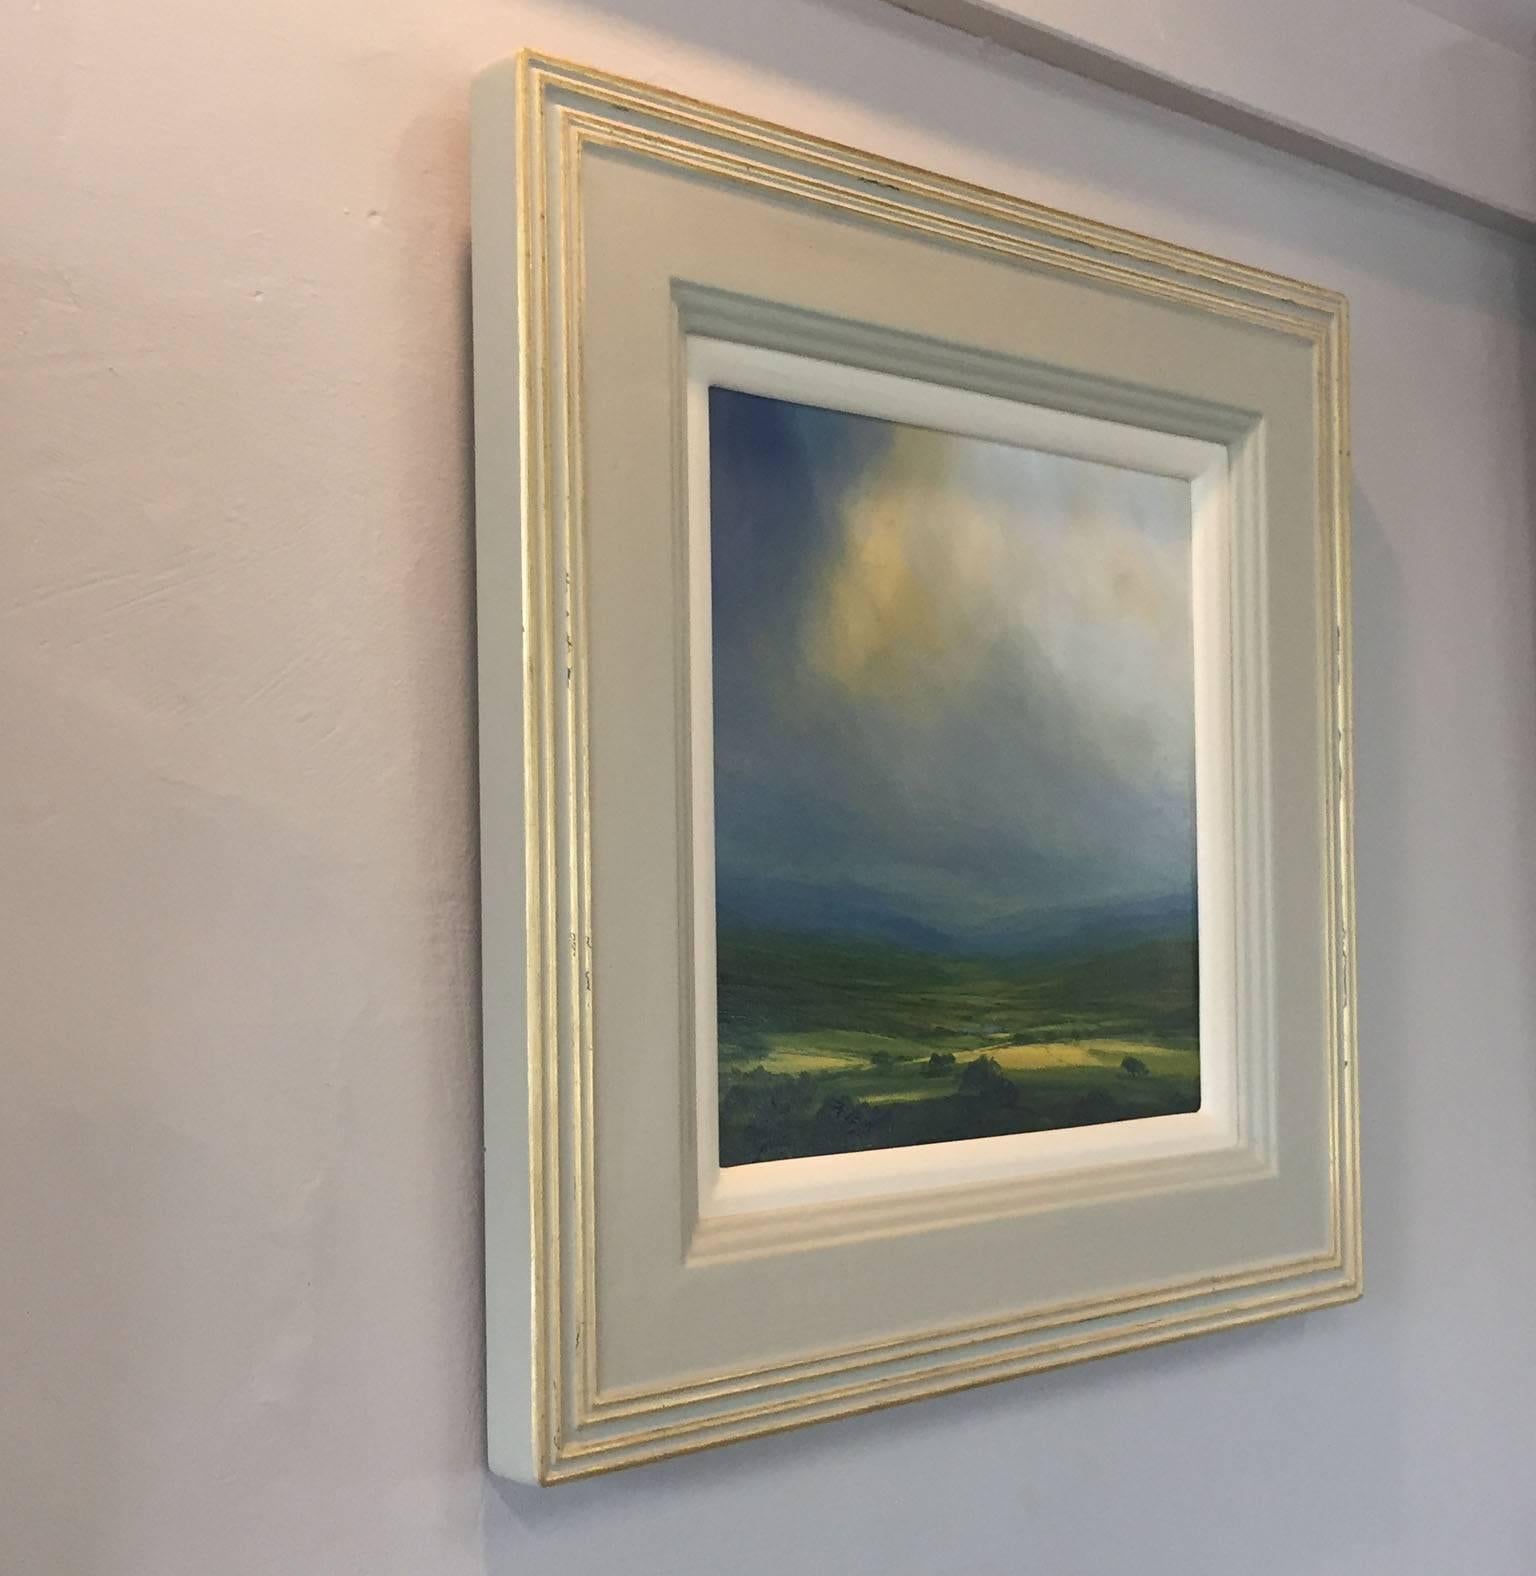 Harry Brioche, ‘Passing Through’ is an original landscape oil painting on board and is inspired by the Lake District Landscapes. This piece was created from memory. 
 
“The landscape is almost incidental, my main objectives are to try and capture